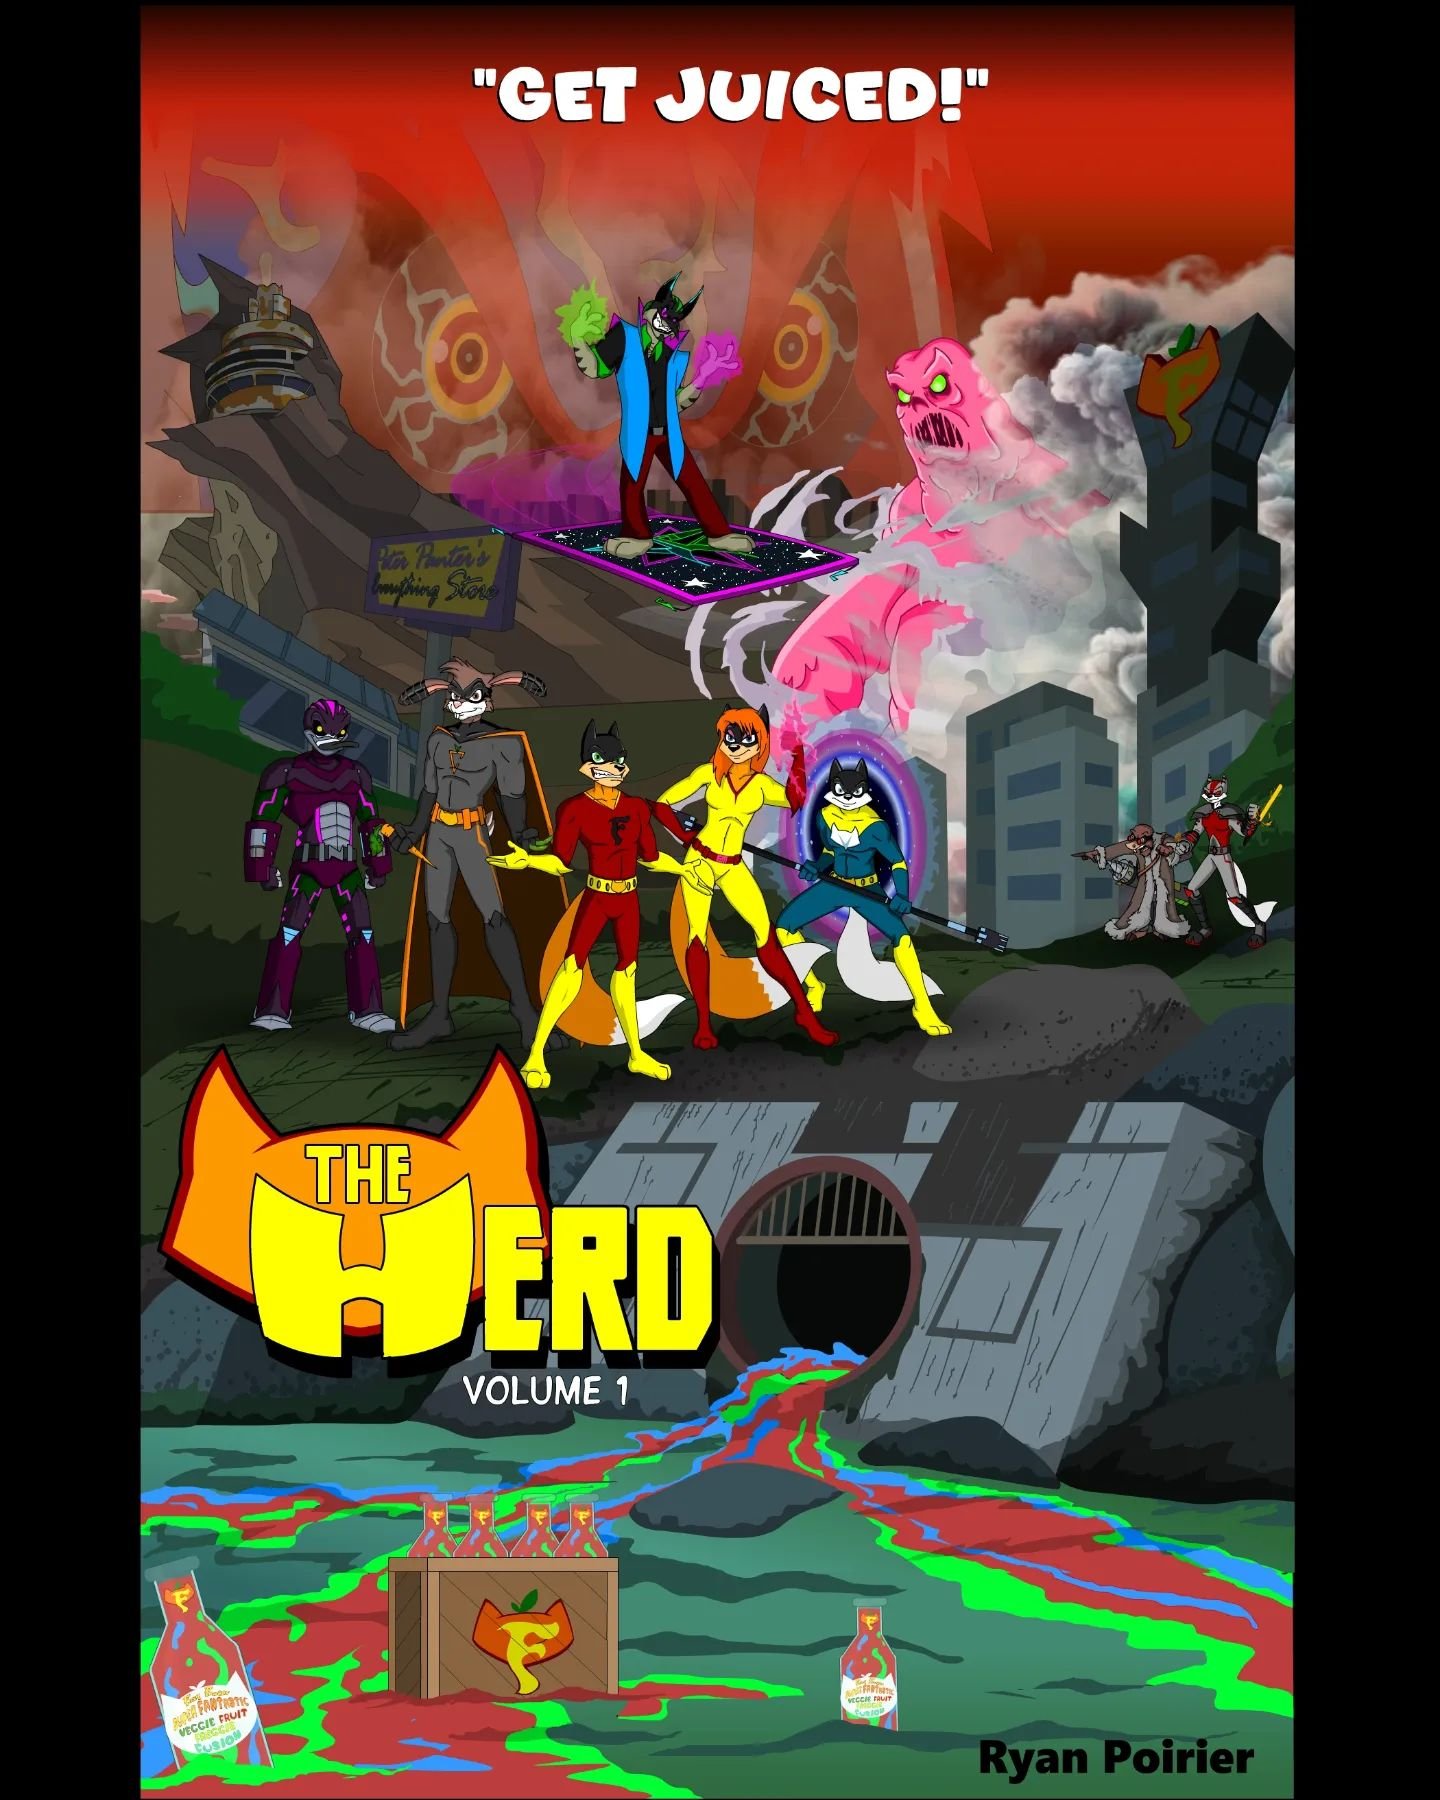 &quot;GET JUICED!&quot; 🍹💥 Unleash the power with 'The Herd Volume 1' - your gateway to a world where superpowers come in a bottle, and every sip is an adventure!&nbsp; Meet us where the action is - at the 🦸&zwj;♀️Comicons or tap into the adventur